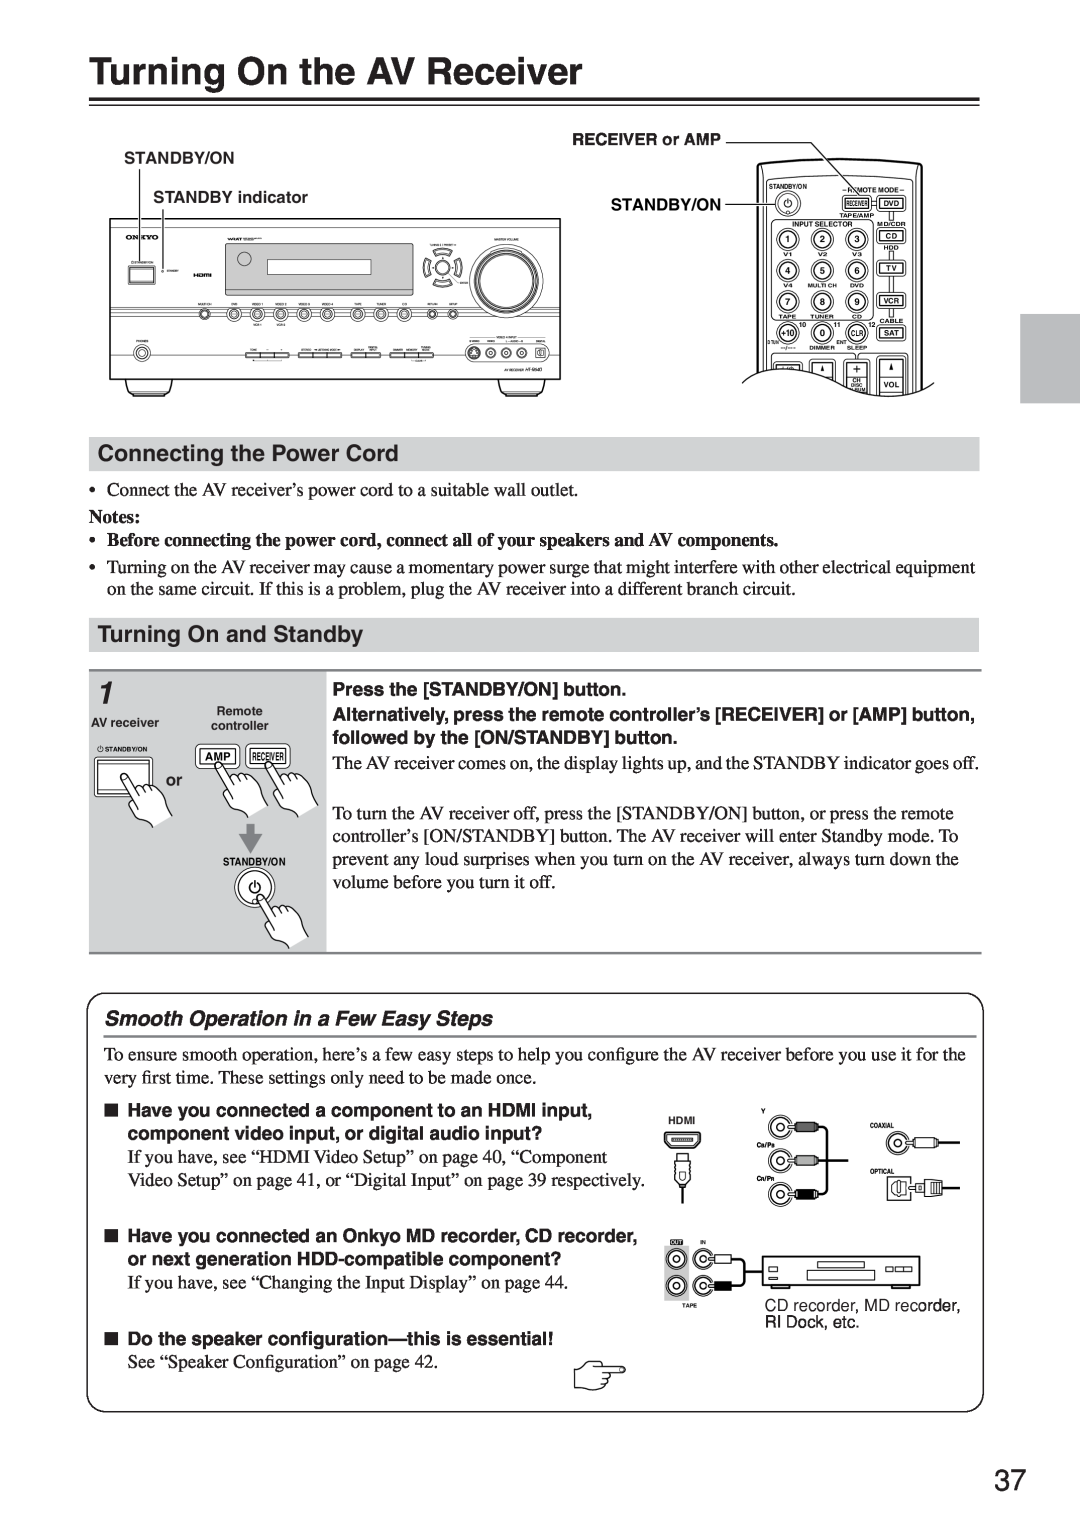 Onkyo HT-R640 instruction manual Turning On the AV Receiver, Connecting the Power Cord, Turning On and Standby 